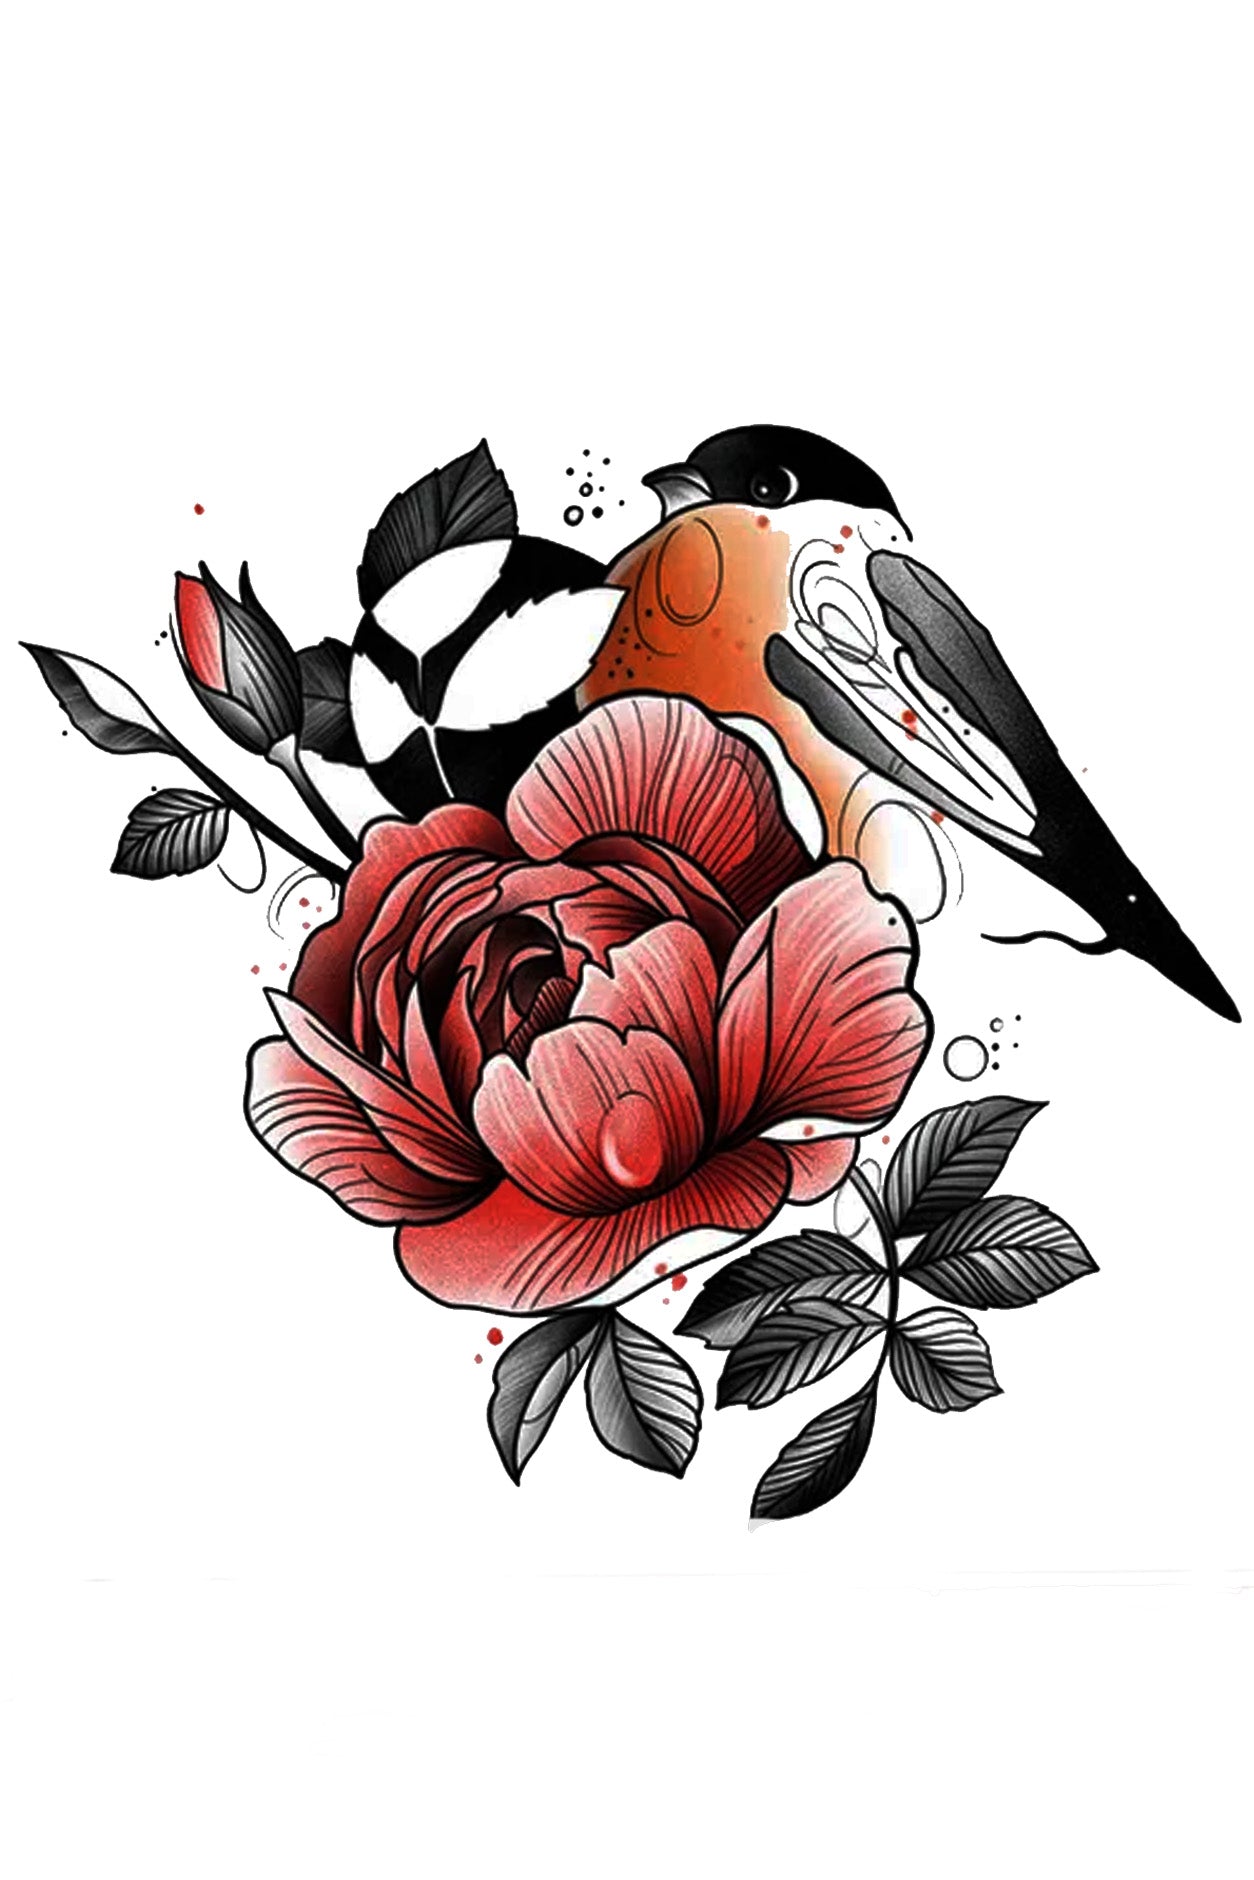 A fat stern robin is perched on a large pale red rose. The rose is in full bloom with a new bud ready to open, it is surrounded by leaves and soft motion circles.